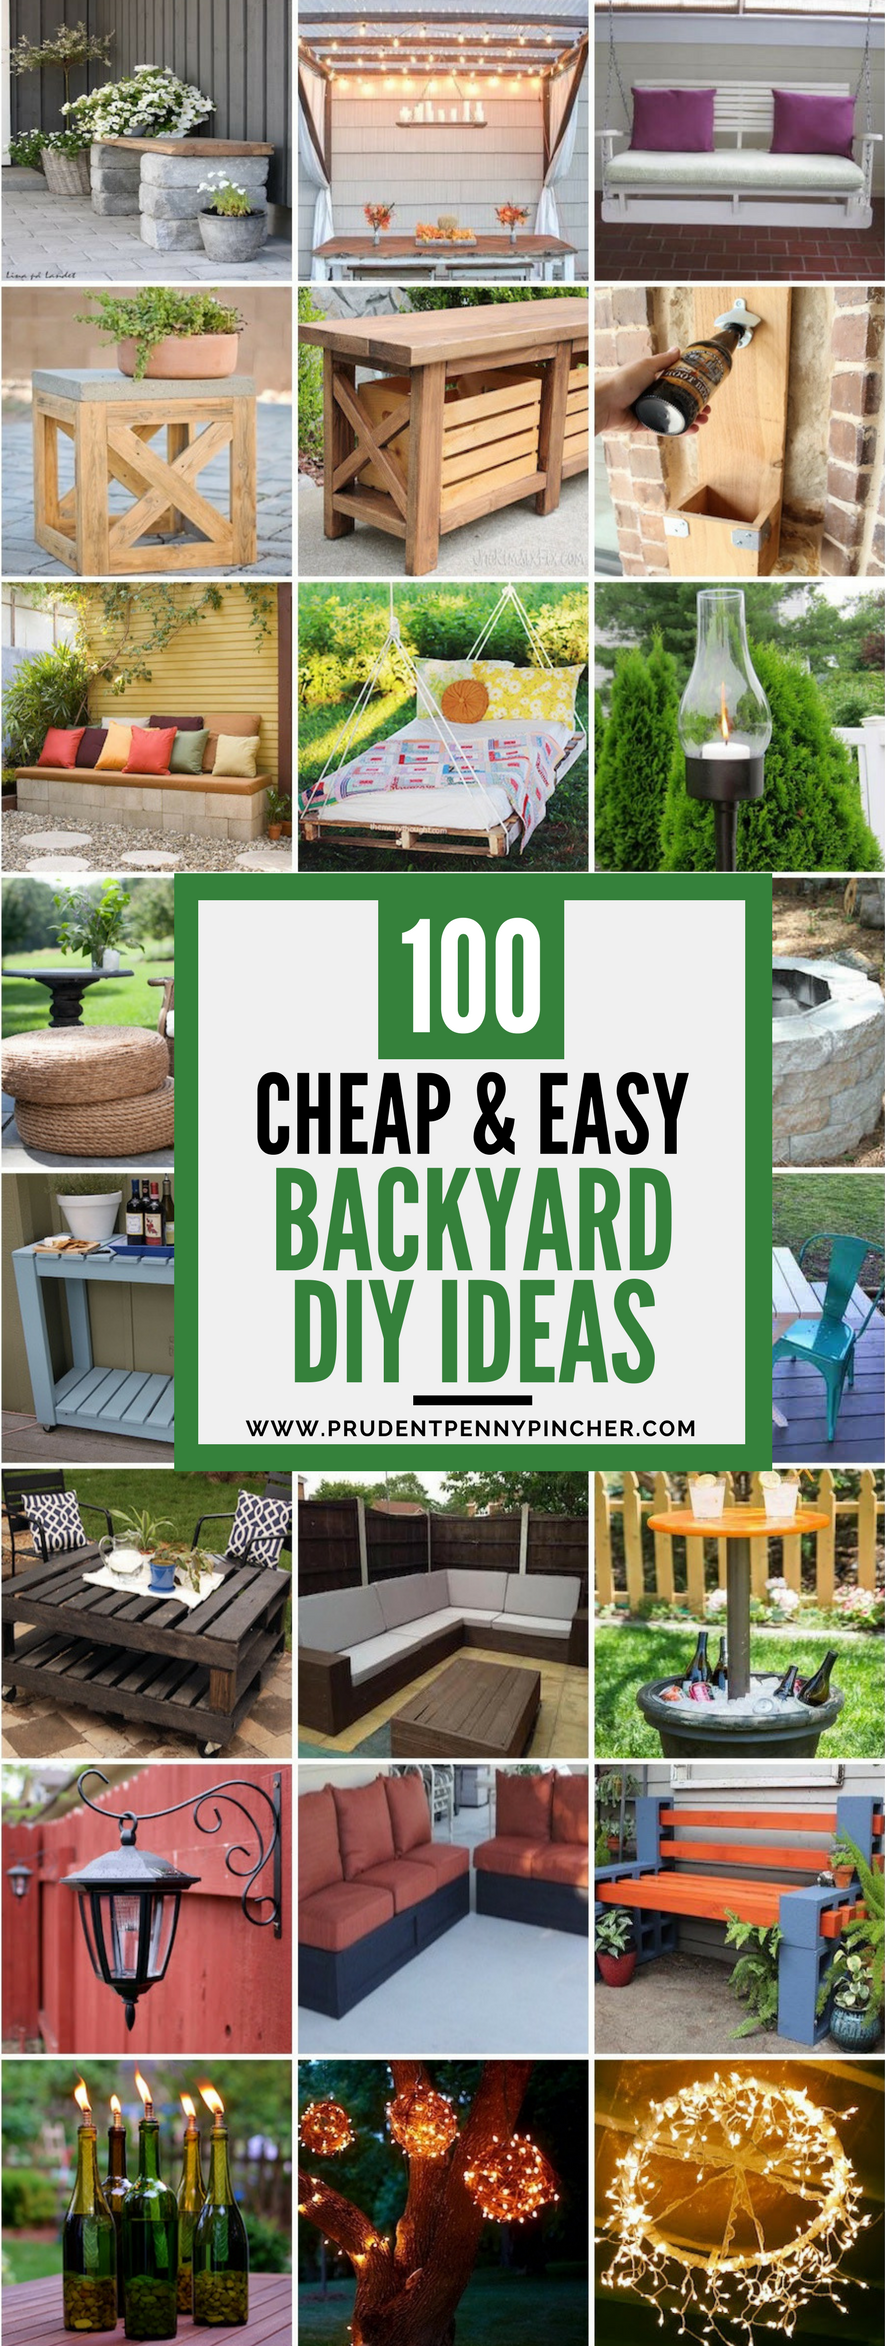 100 Cheap and Easy DIY Backyard Ideas | Prudent Penny Pincher